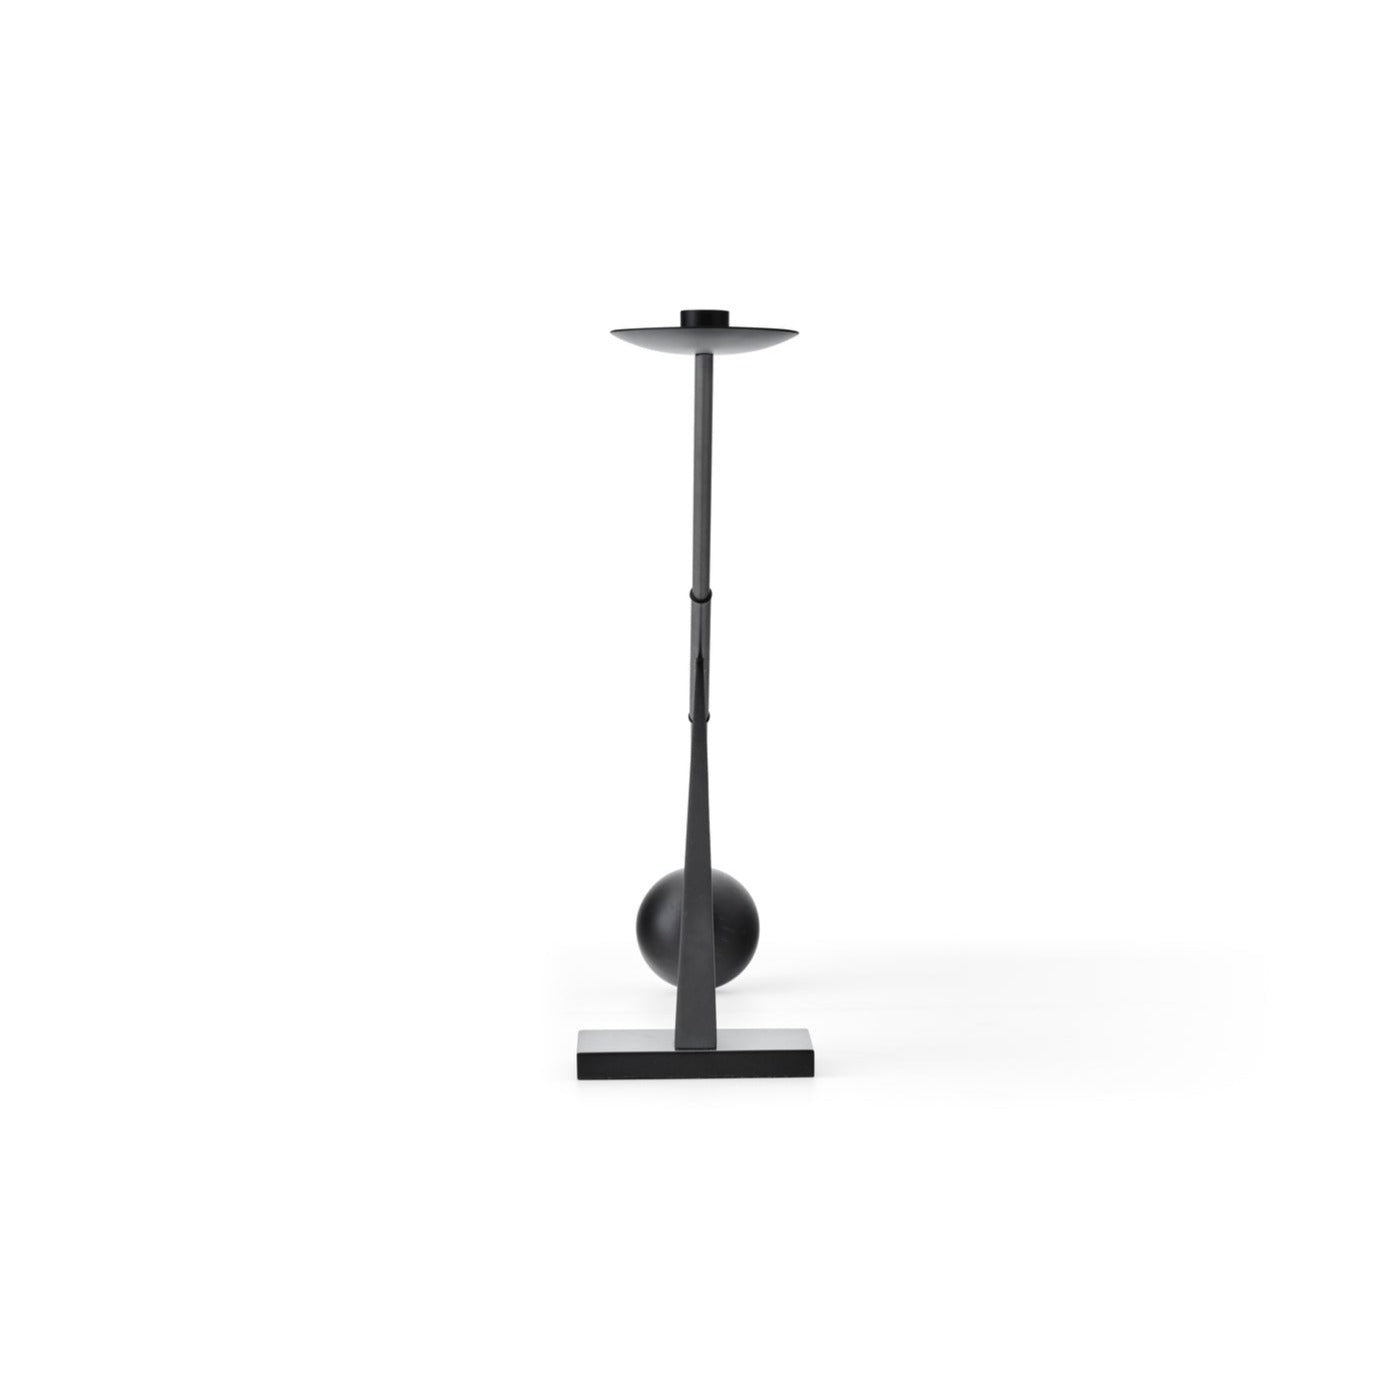 INTERCONNECT CANDLE HOLDER - BLACK